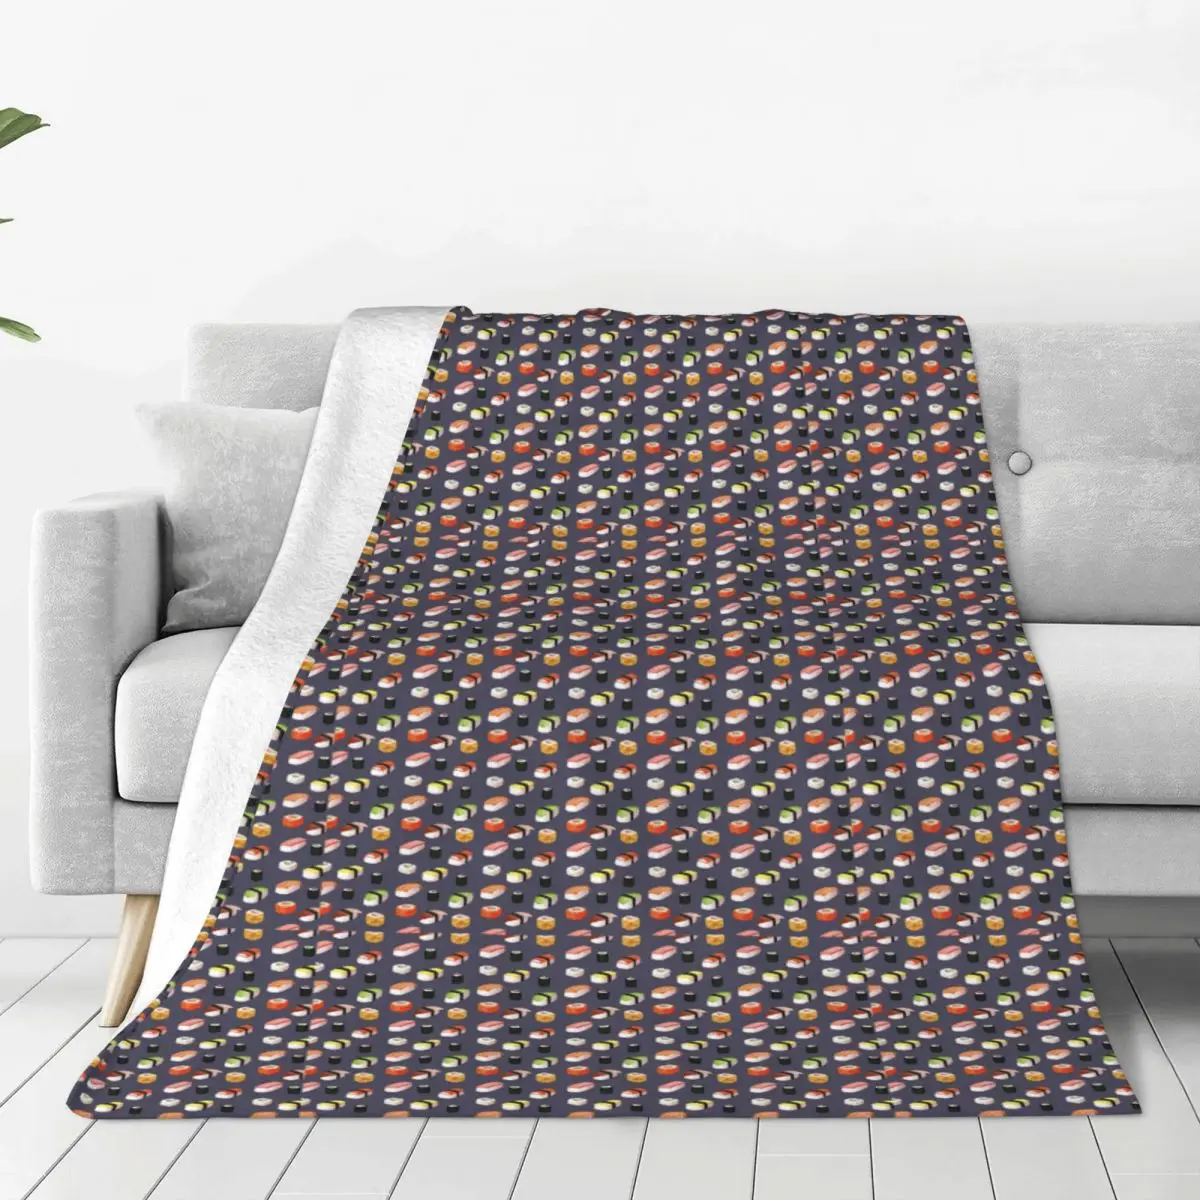 

Sushi Pattern Soft Fleece Throw Blanket Warm and Cozy for All Seasons Comfy Microfiber Blanket for Couch Sofa Bed 40"x30"